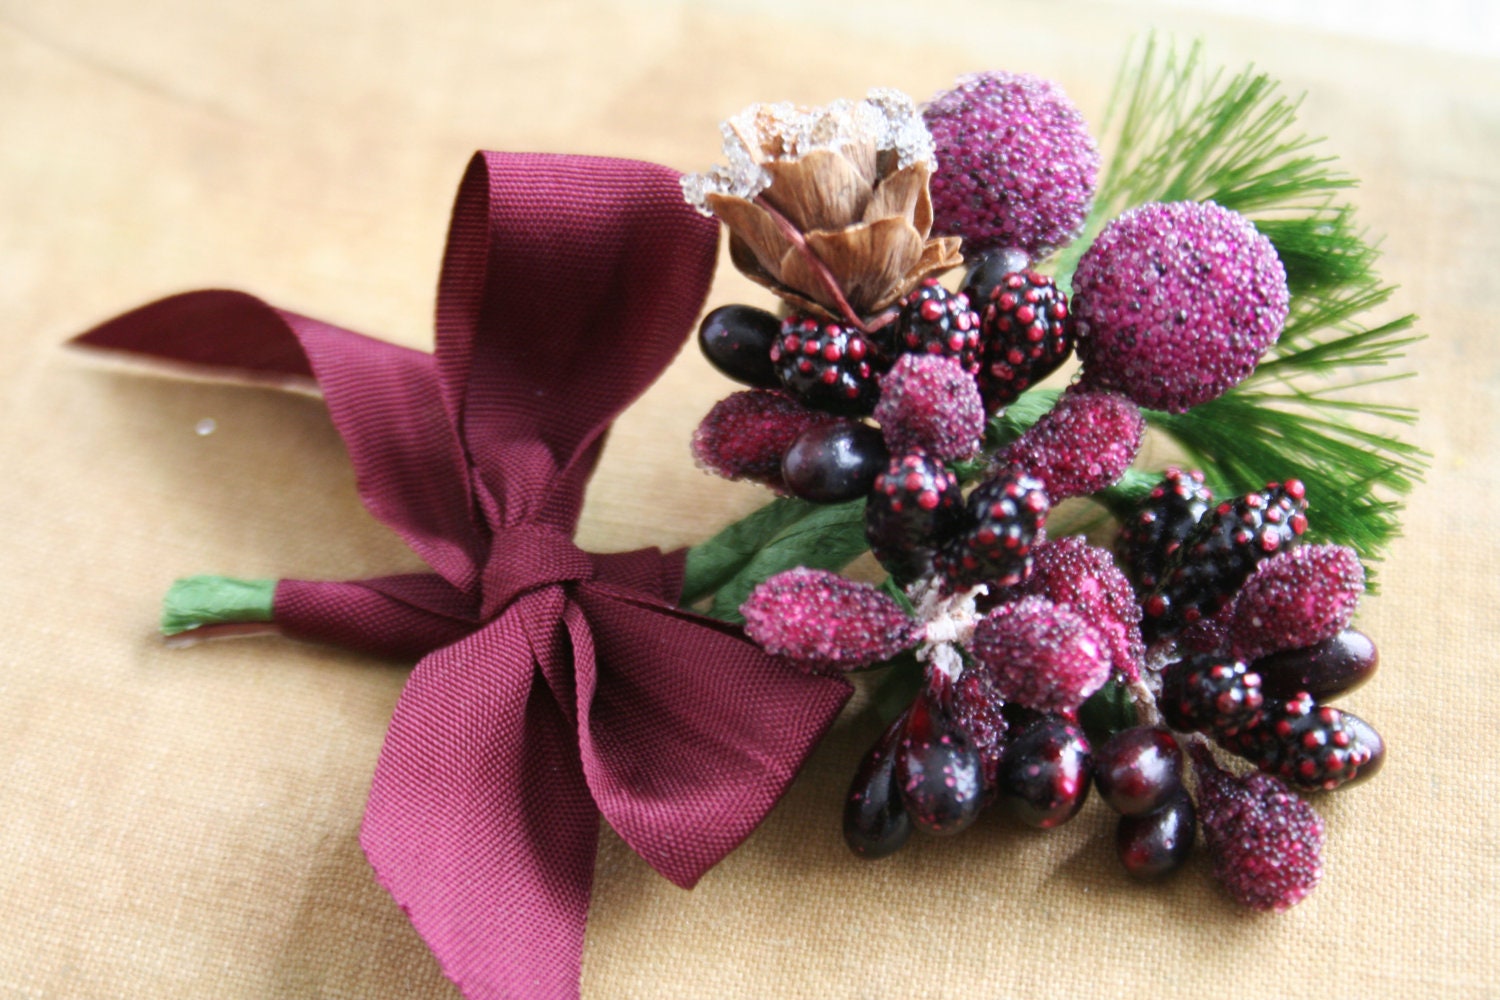 sugar plum frosted stamen bundle with wired pinecone and greenery - juliecollings